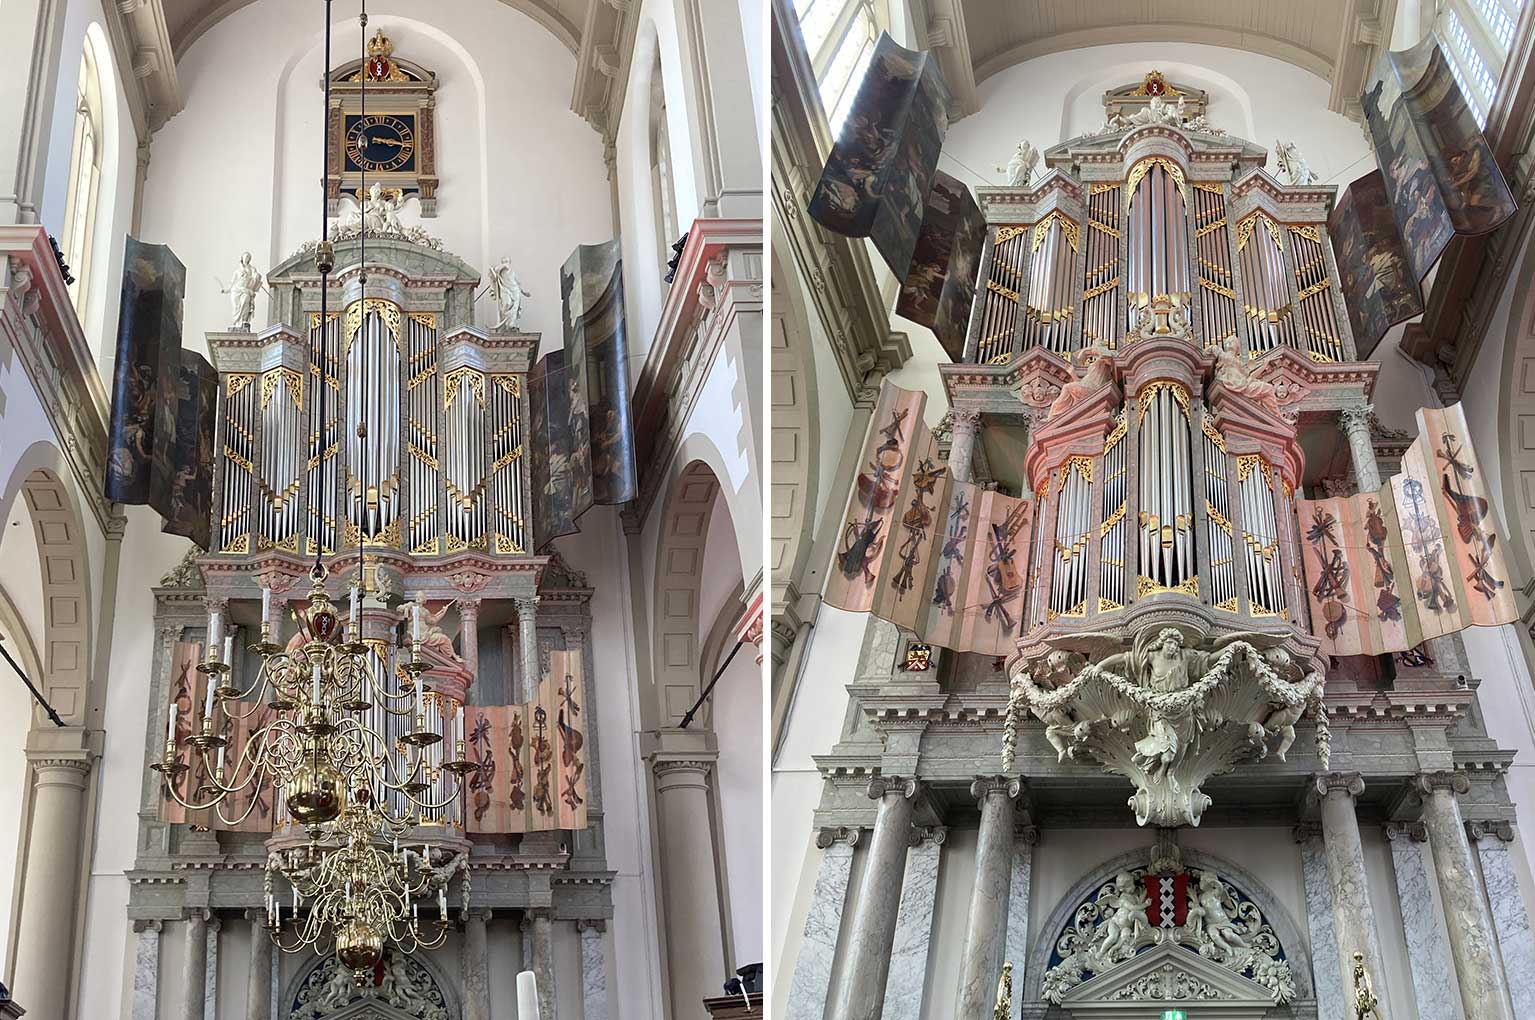 Two more pictures of the Westerkerk organ from 1686, Amsterdam